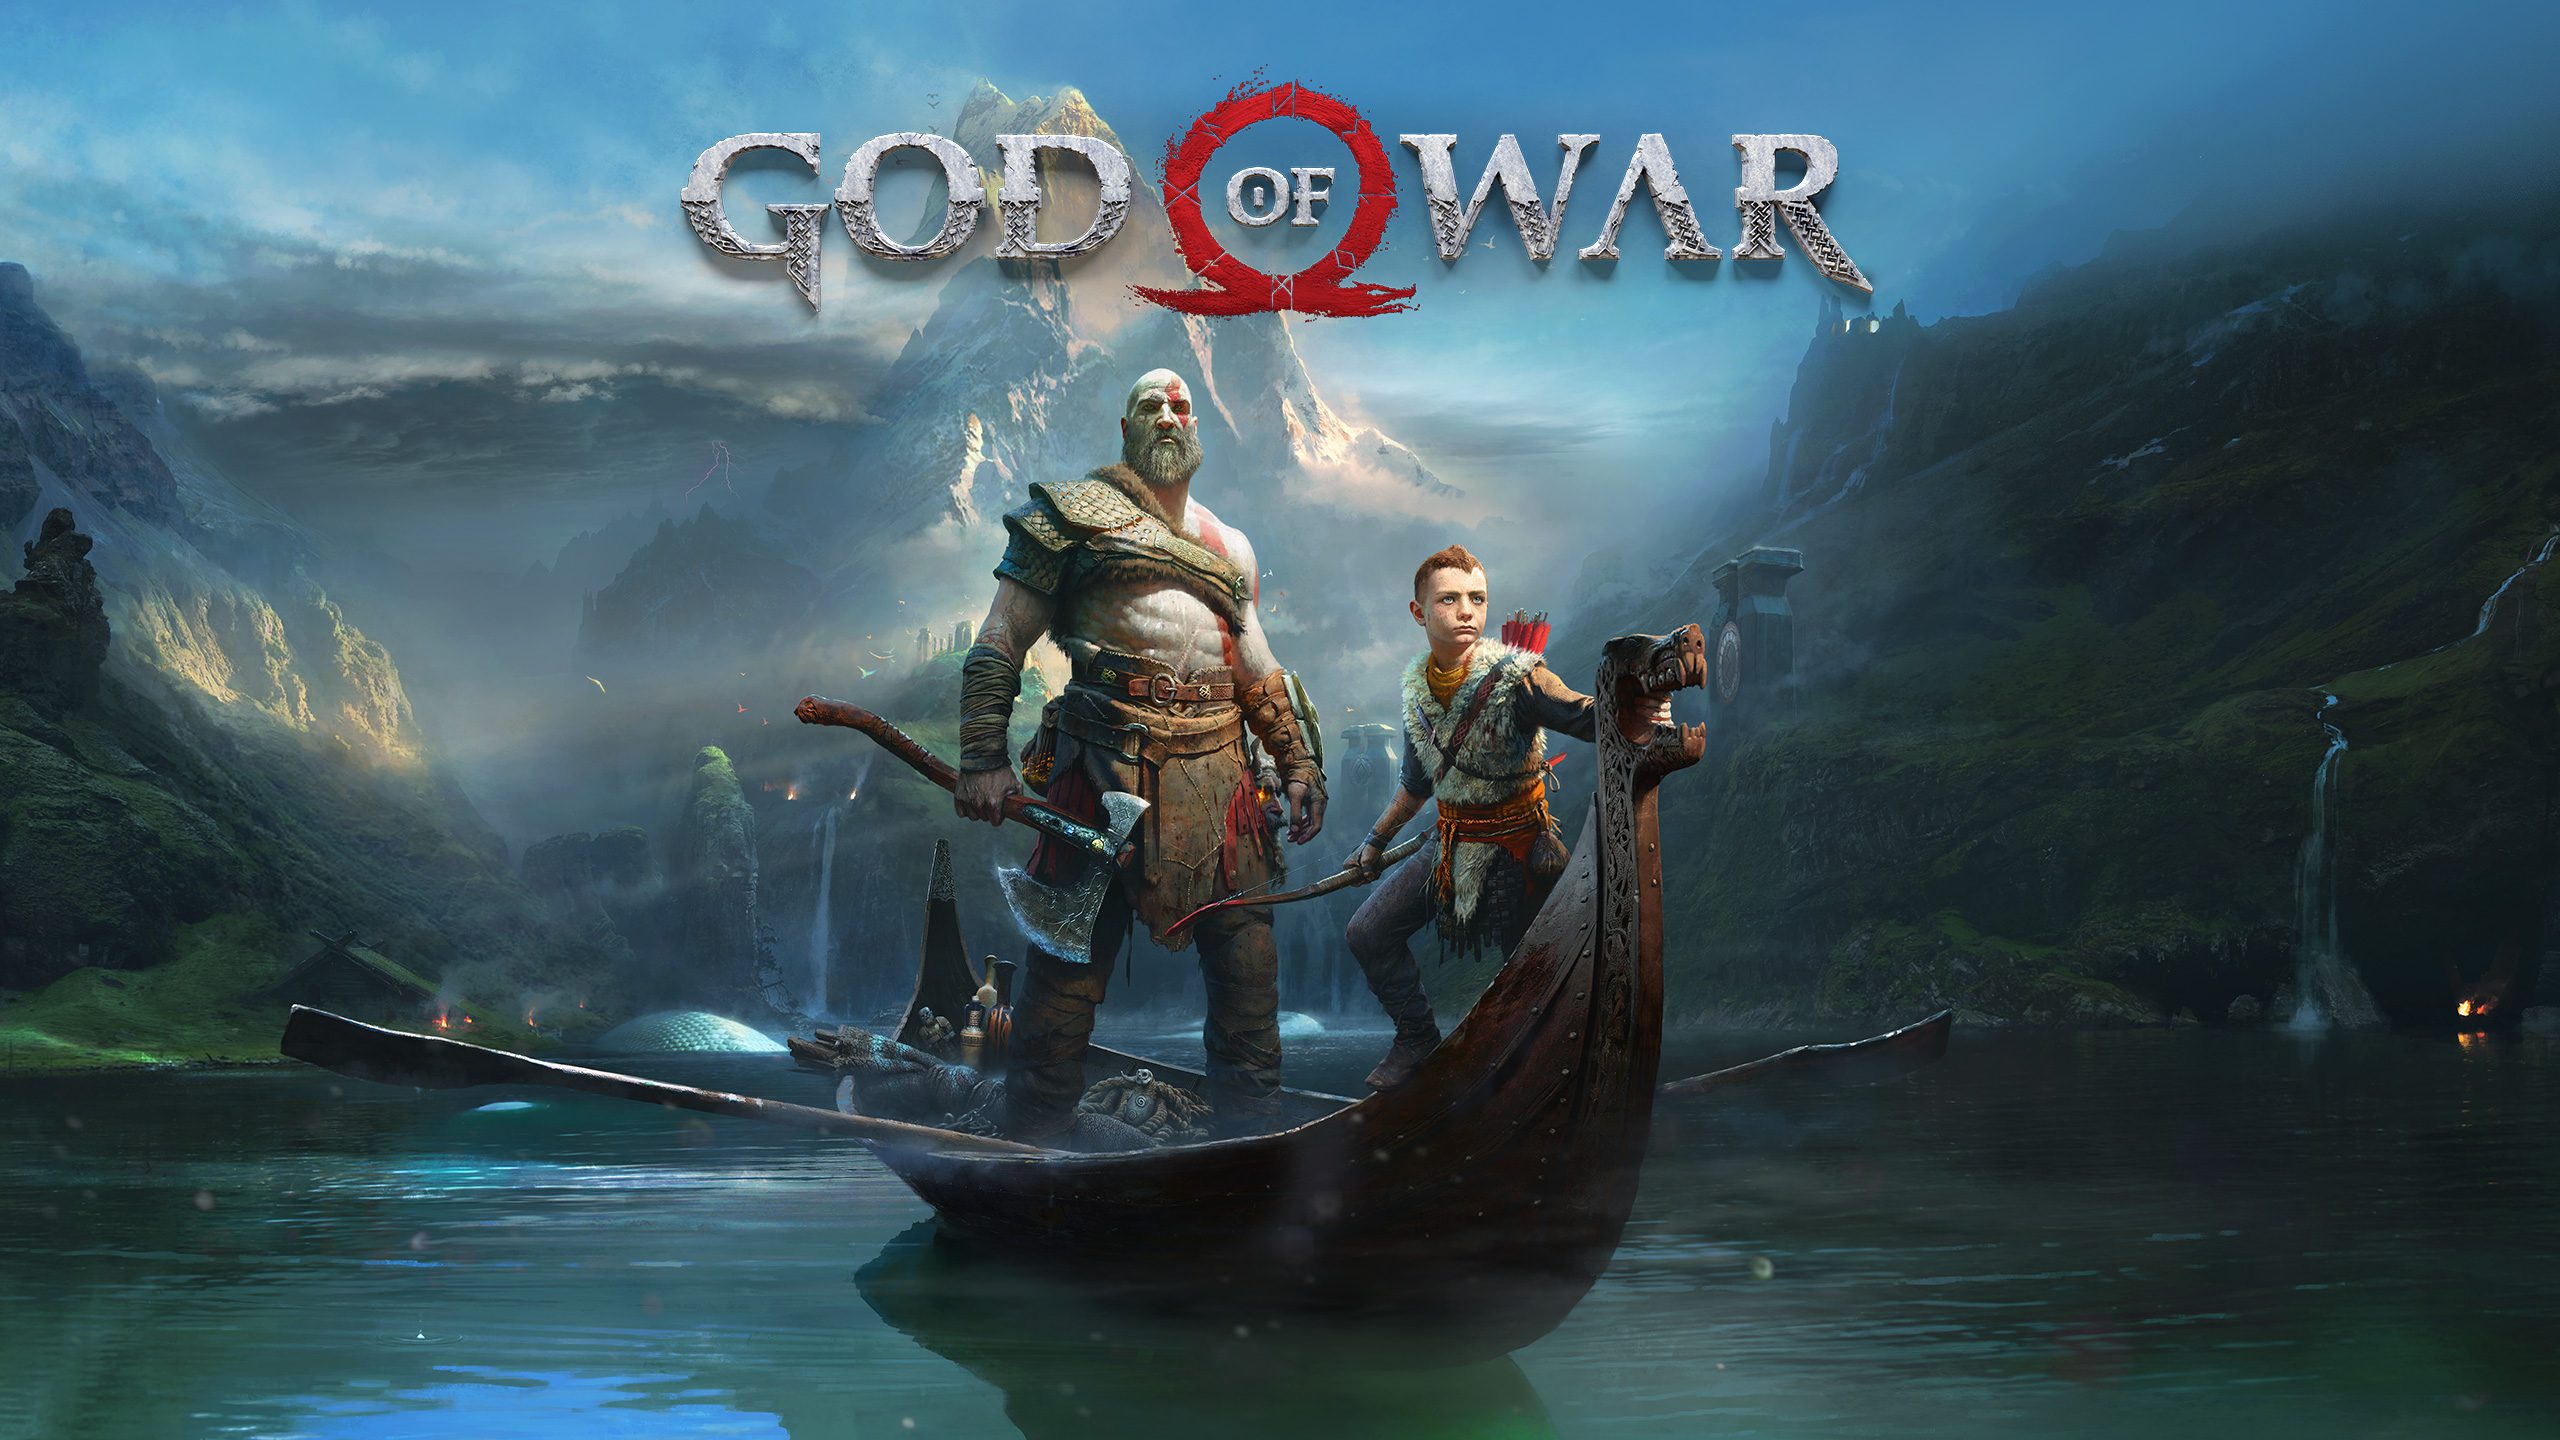 God of War on PC is Available to Buy Now for £39.99